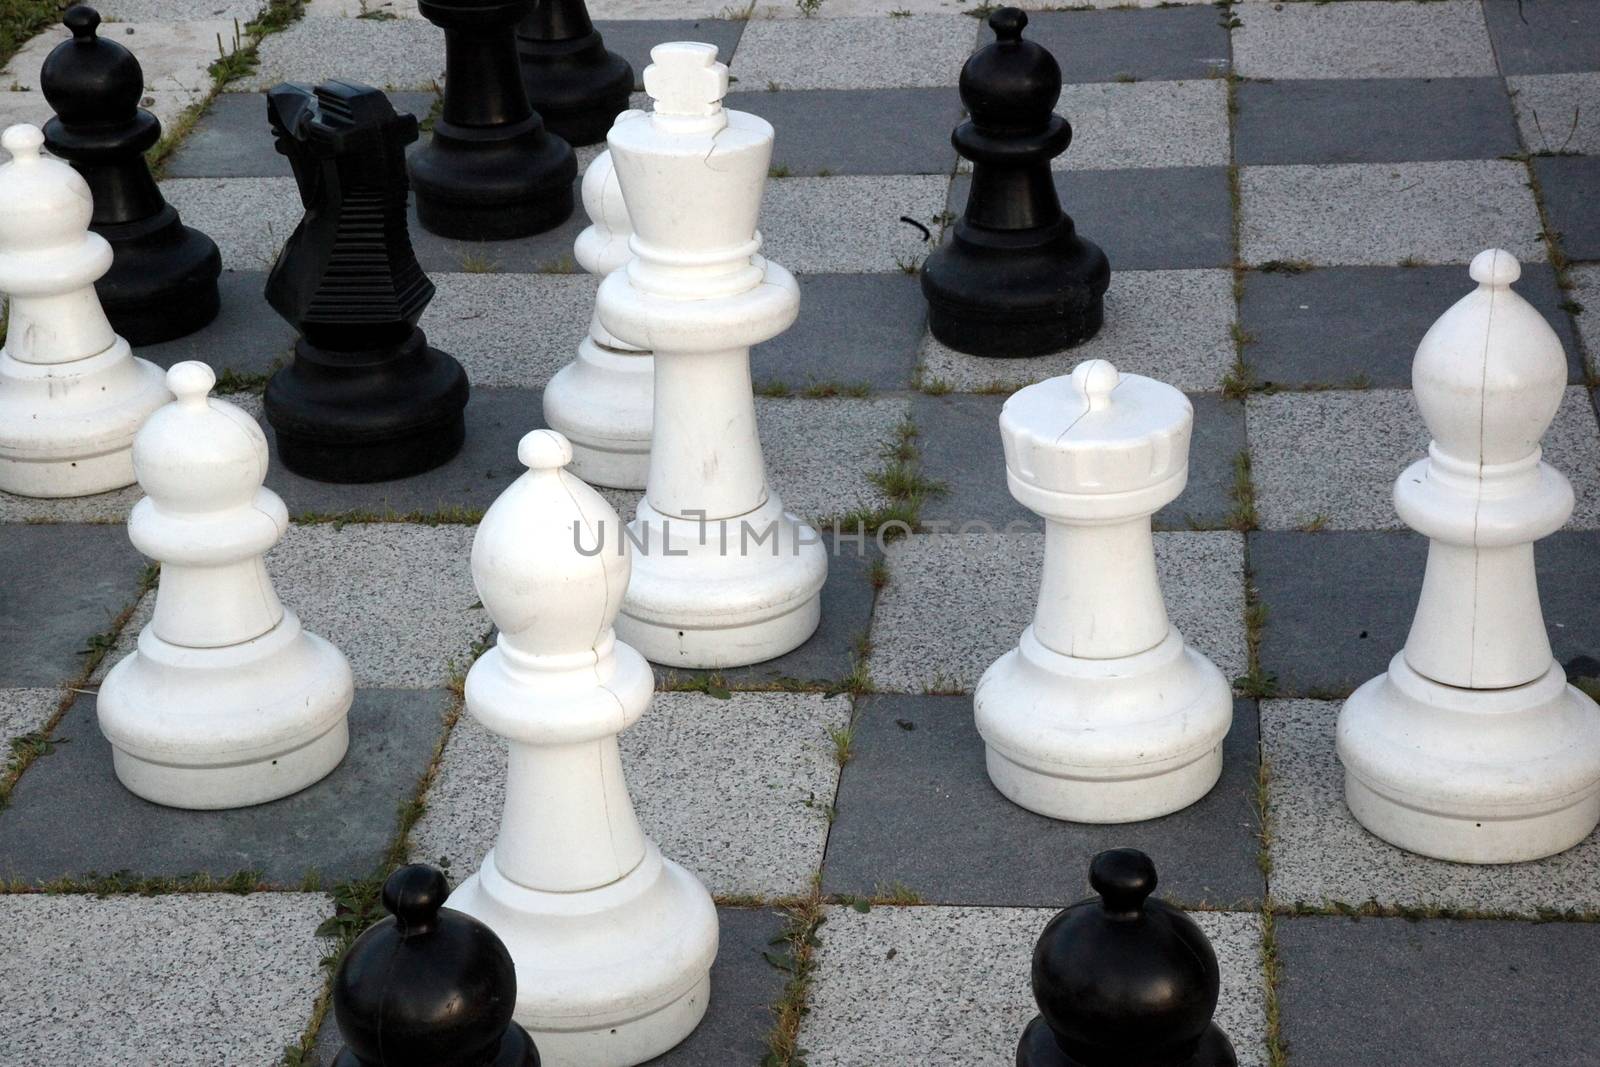 Big chess pieces in outdoor chess game